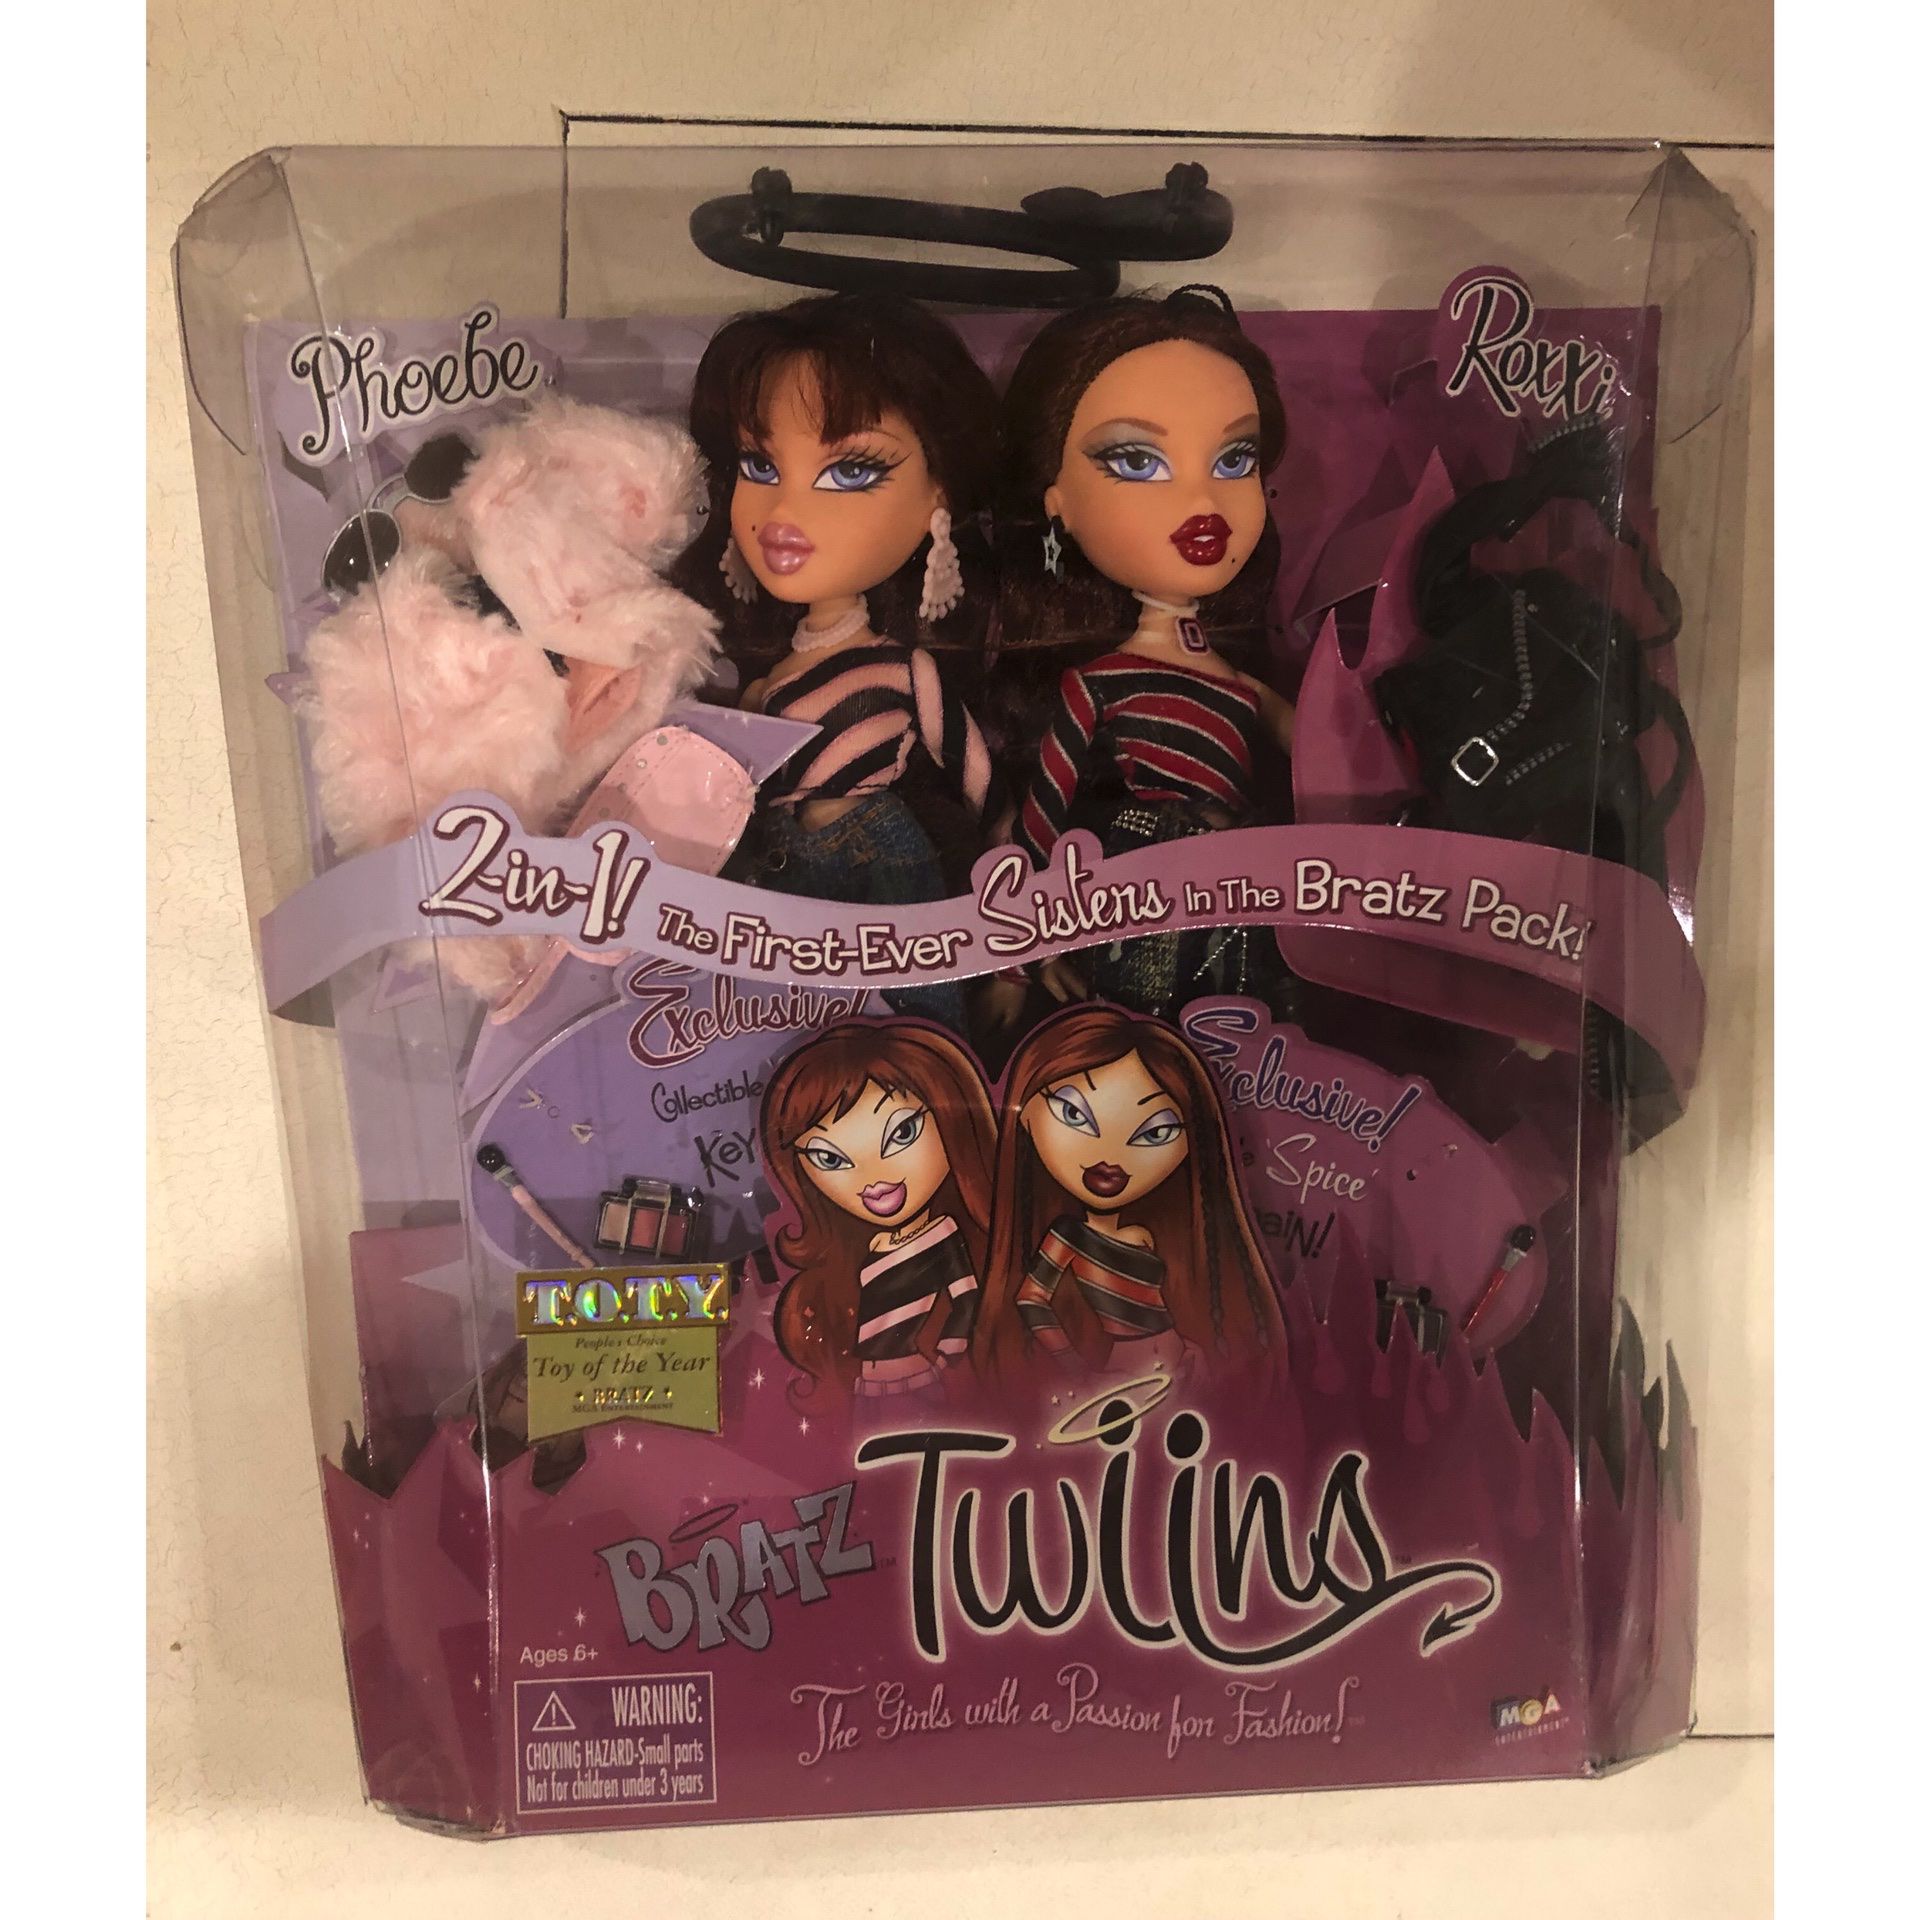 Bratz Twiins Phoebe & Roxxi 2-in-1! The First Ever Sisters In The Bratz Pack